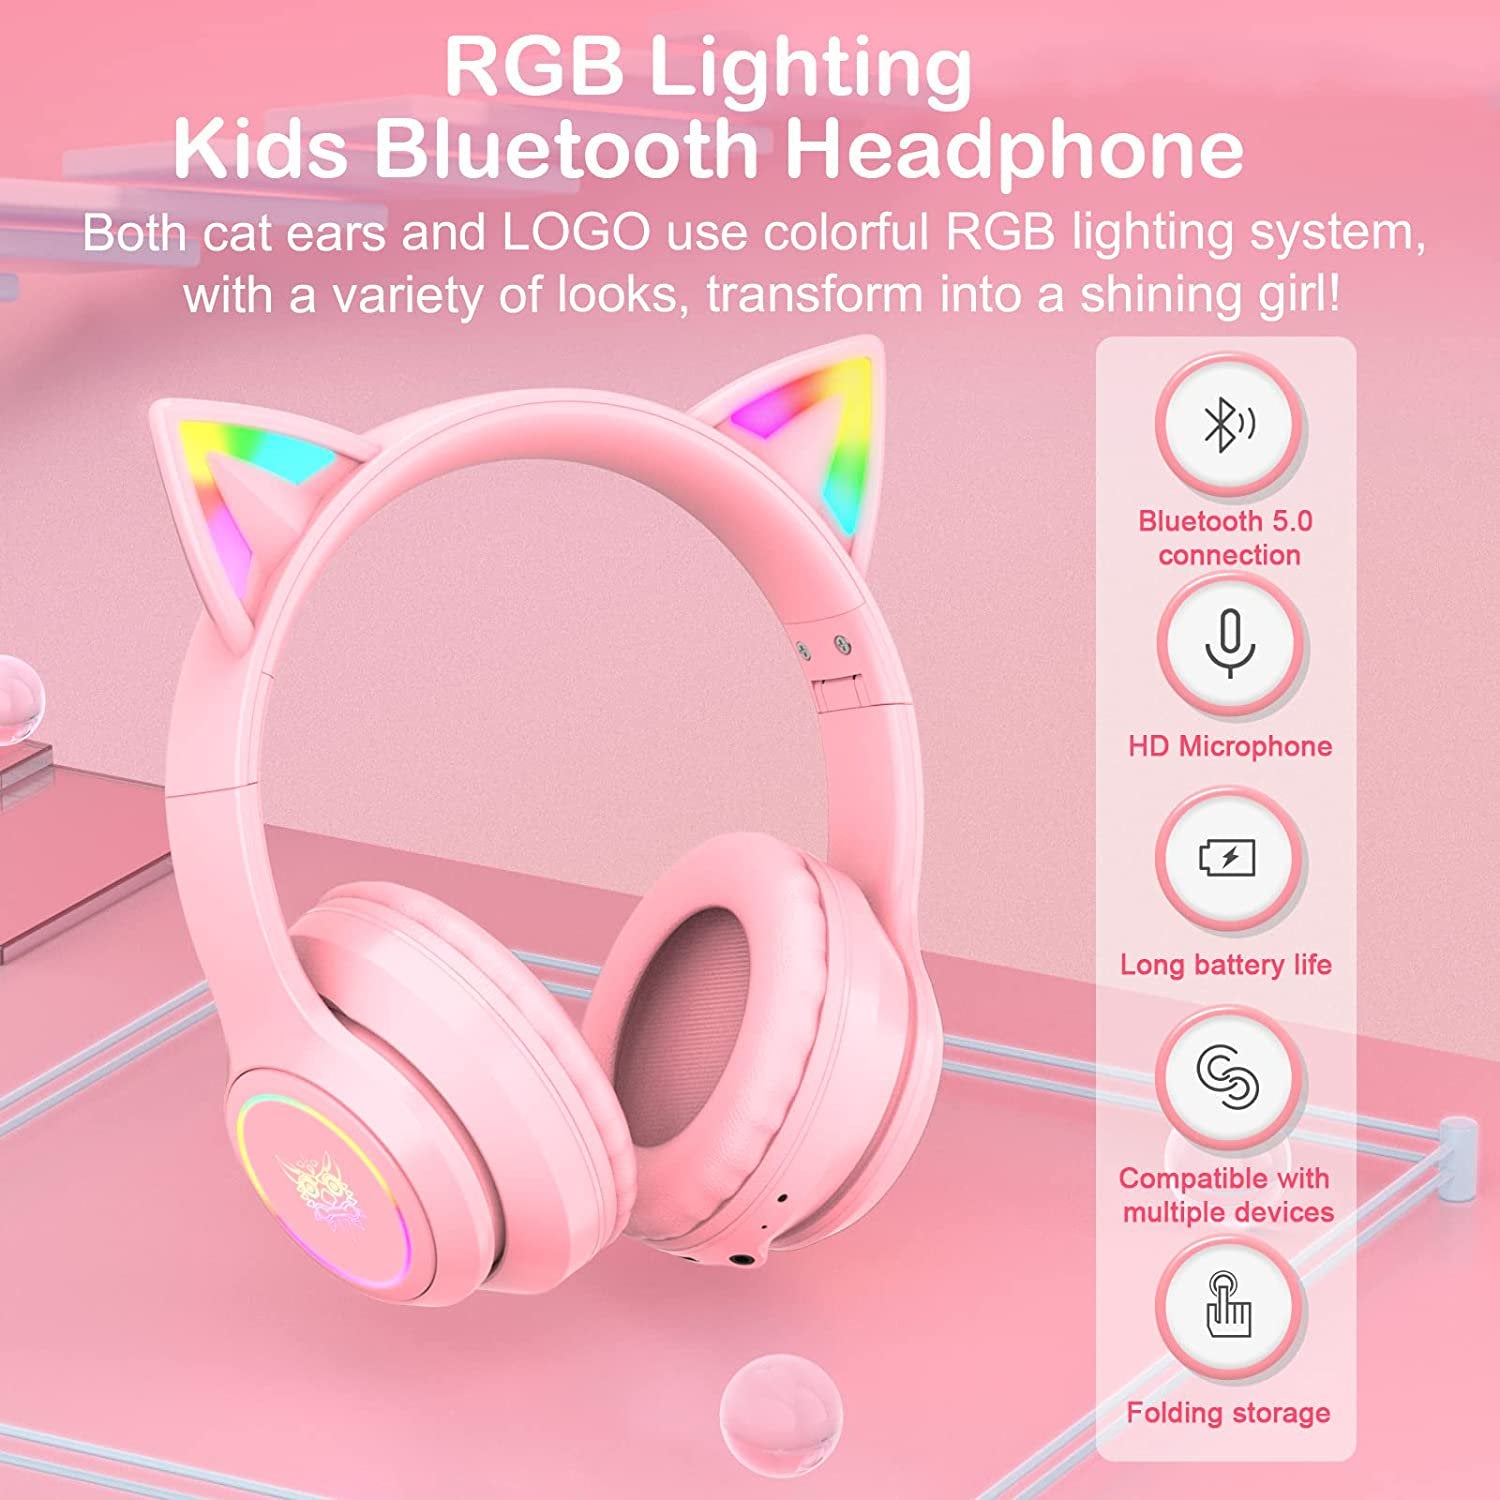 Wireless Bluetooth Headset, ONIKUMA B90 Cat Ear LED Light Up Noise CancellingOver Ear Headphones, Volume Control and Foldable Headset for Tablet/PC/iPad/Cell Phones, Gift for Kids Boys Girls